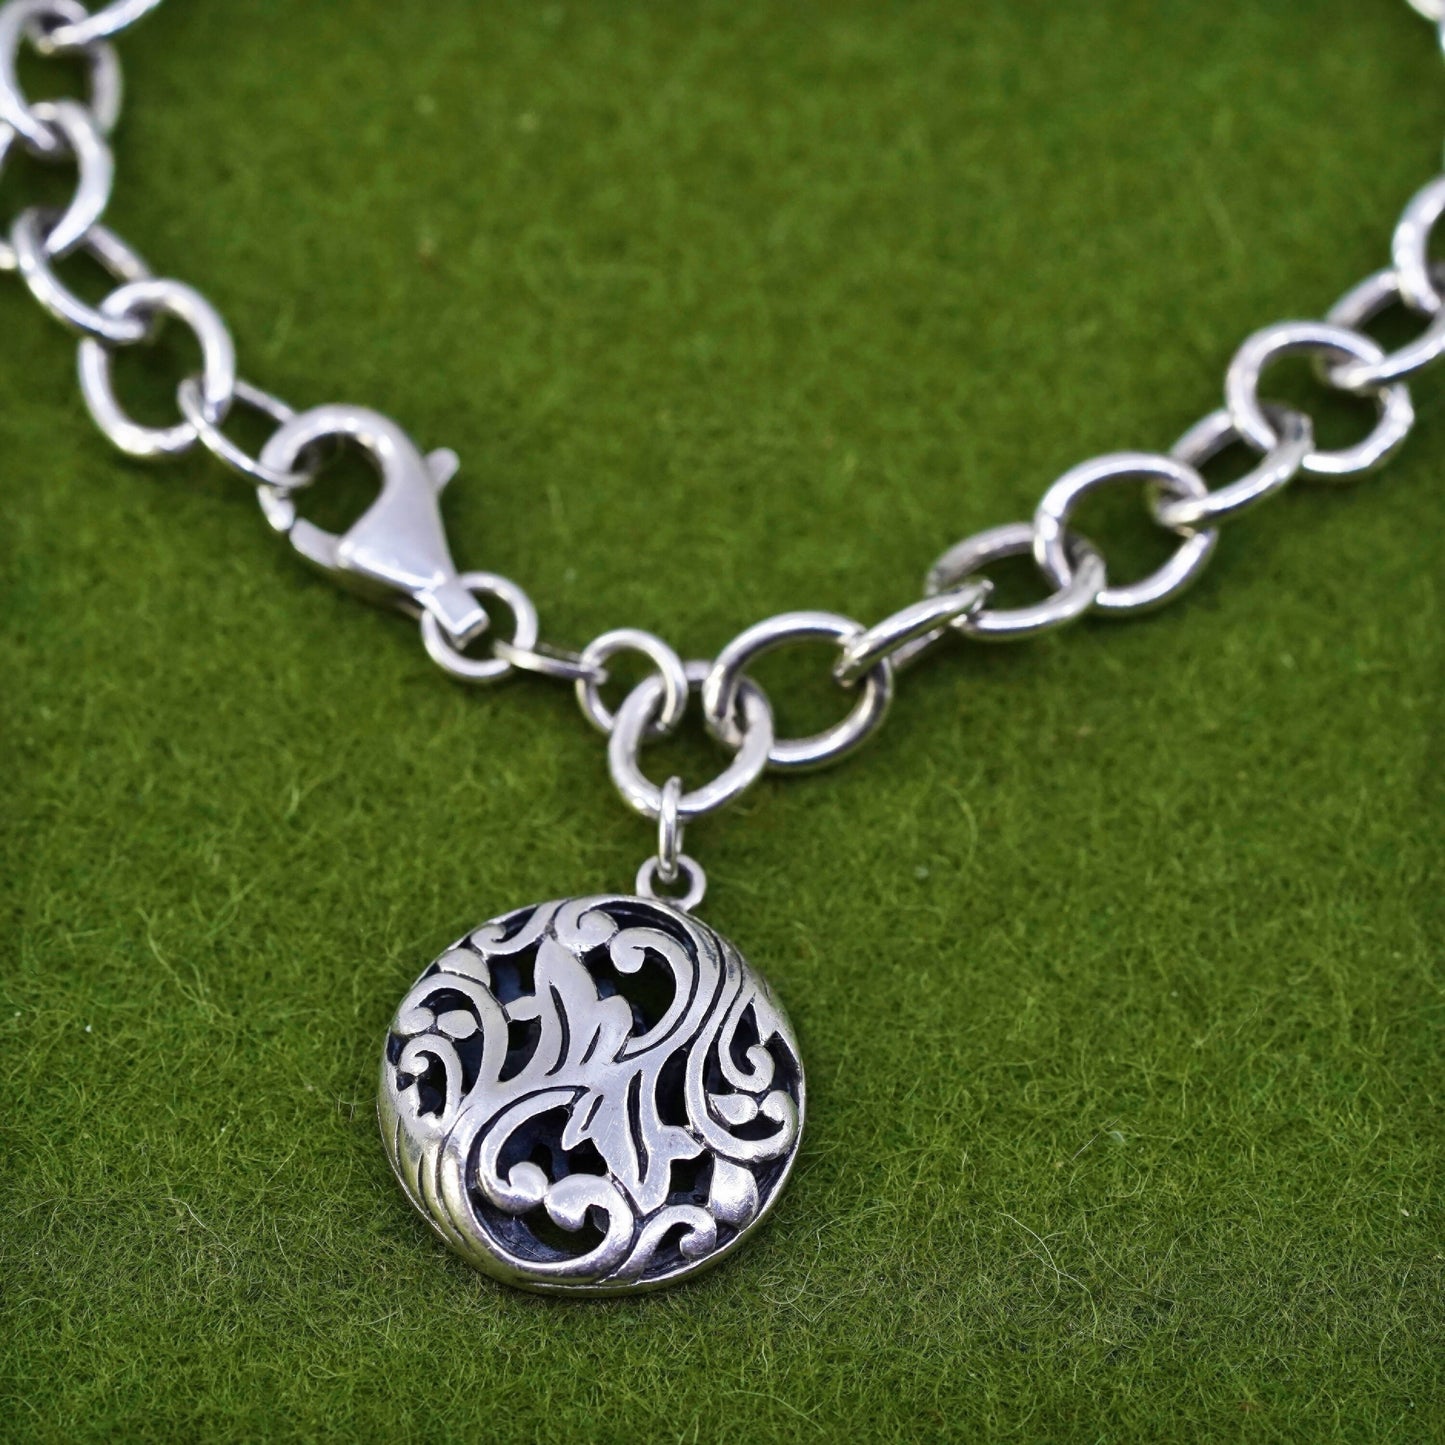 7", sterling 925 silver circle link charm bracelet with filigree circle charm